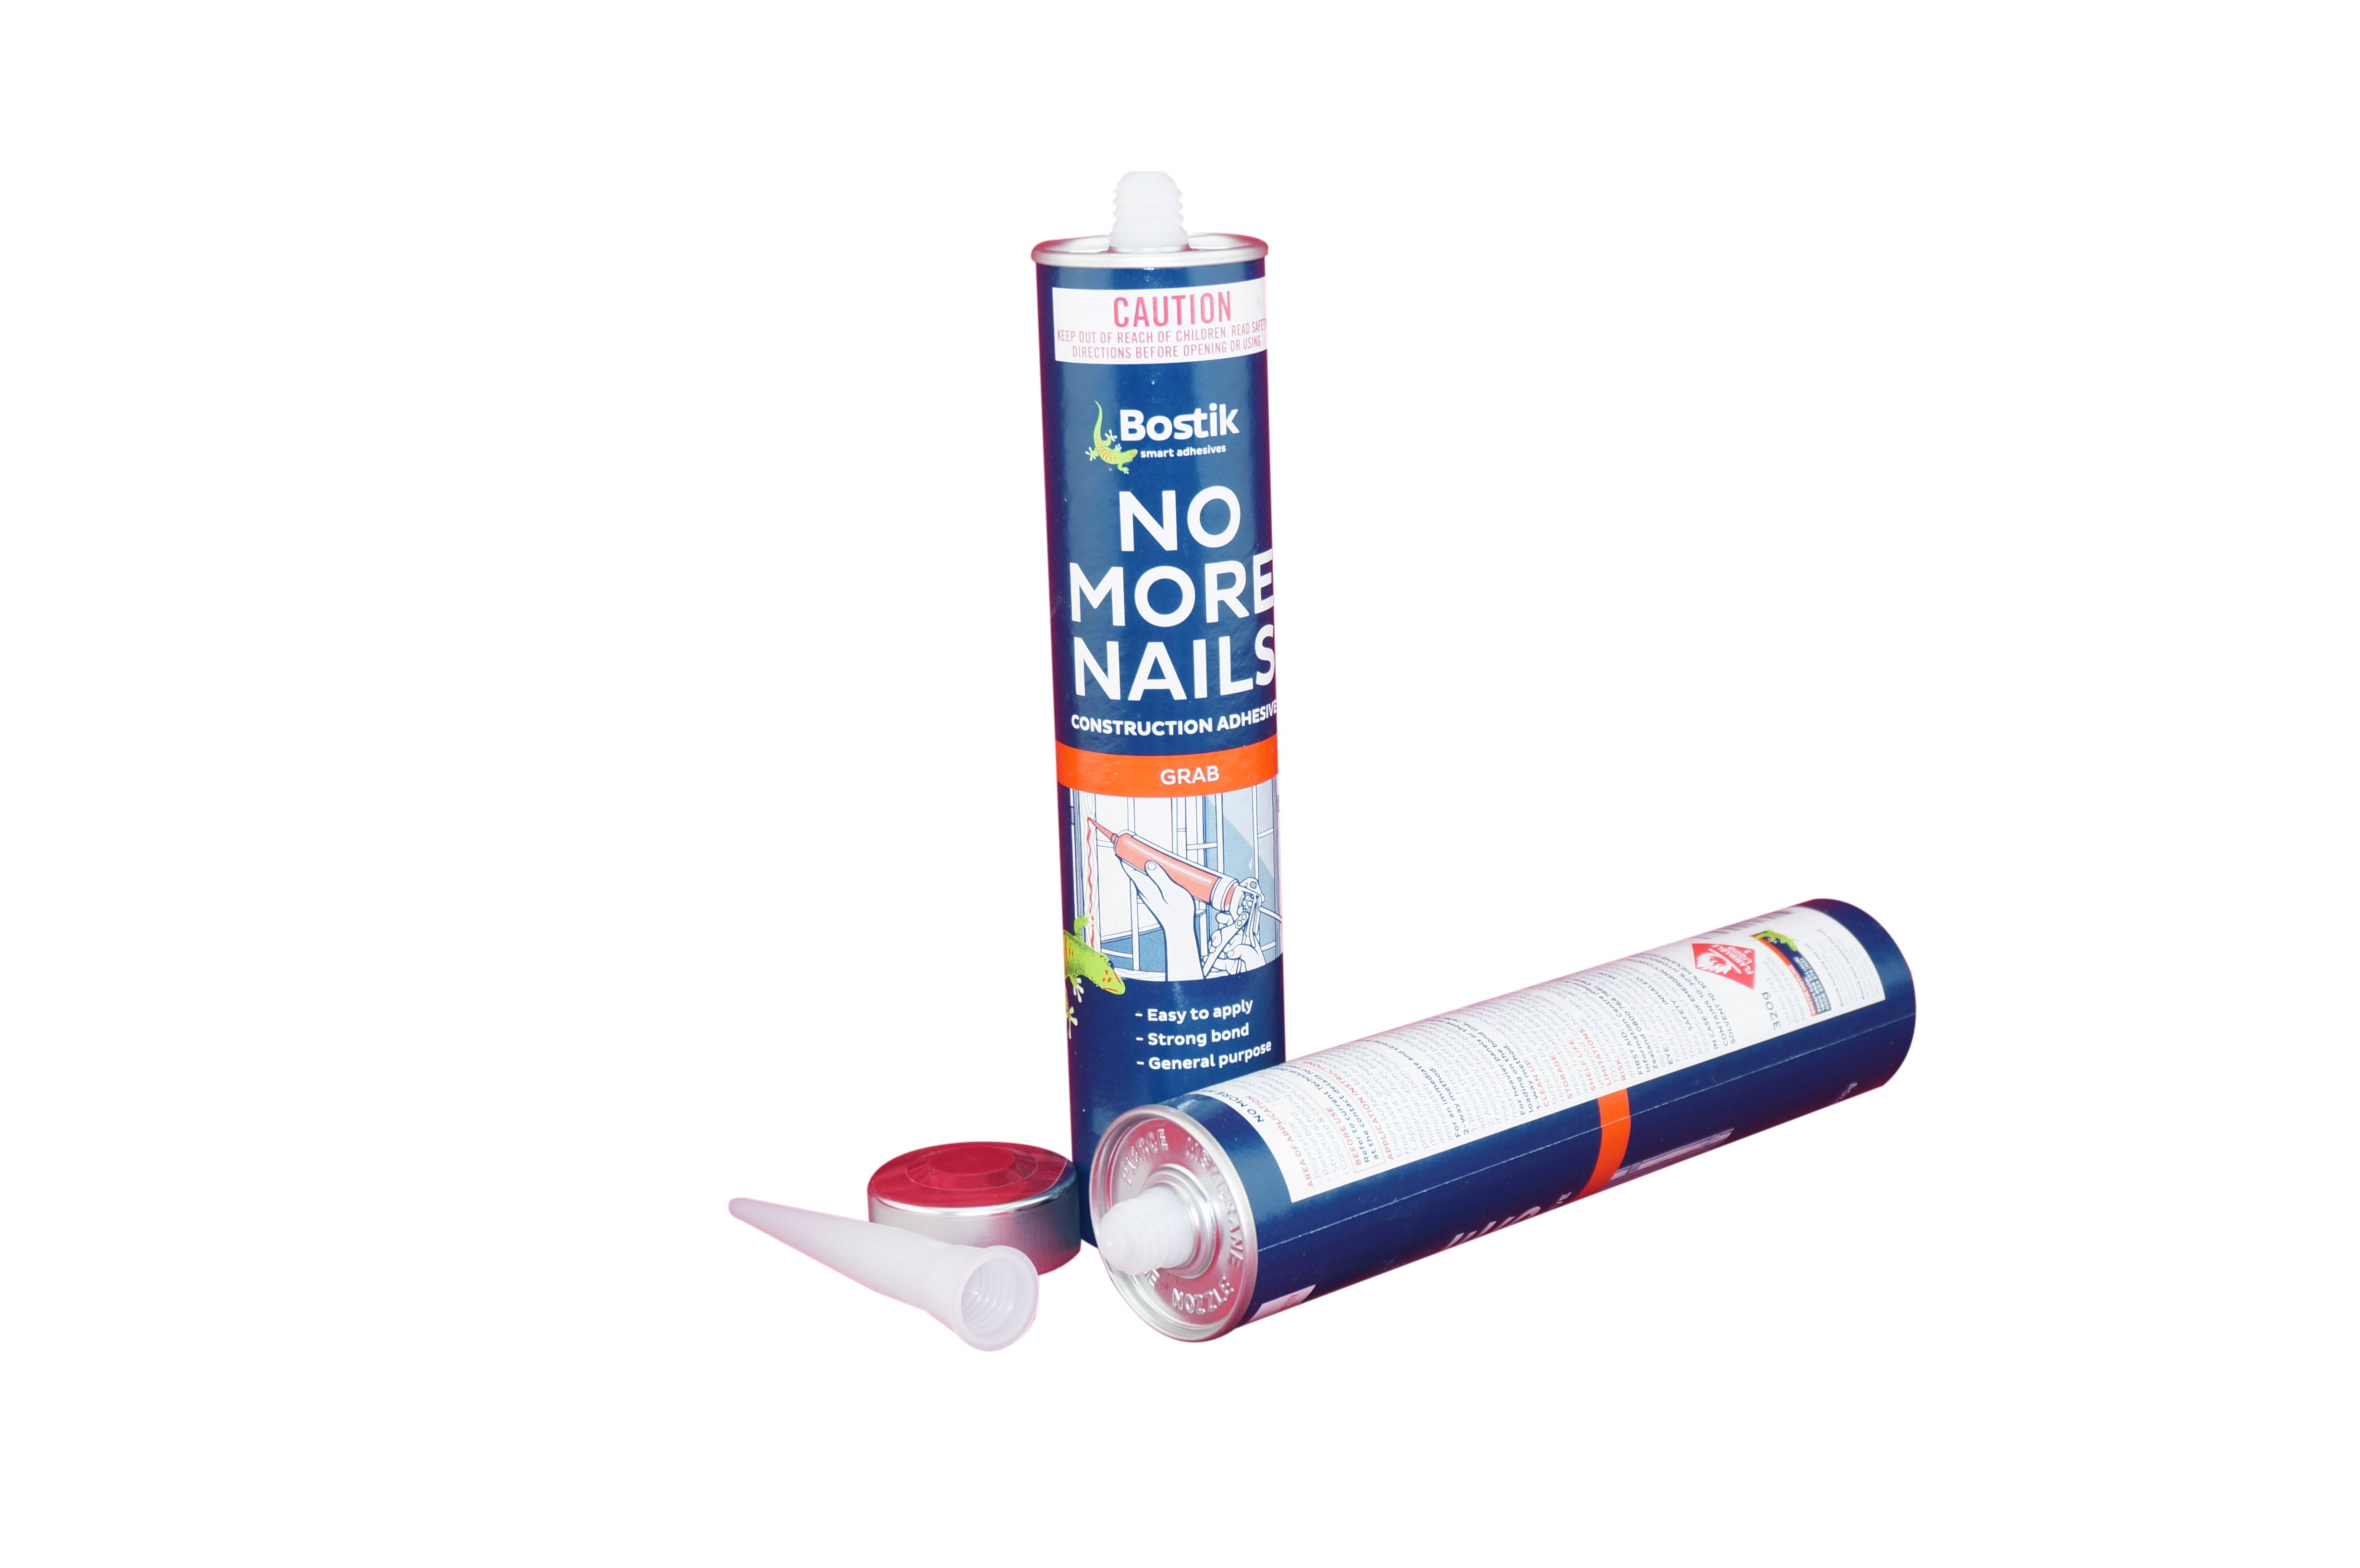 Papertube Co - Polyurethane adhesive glue and sealant paper packaging cartridge tube  – GENFEAL